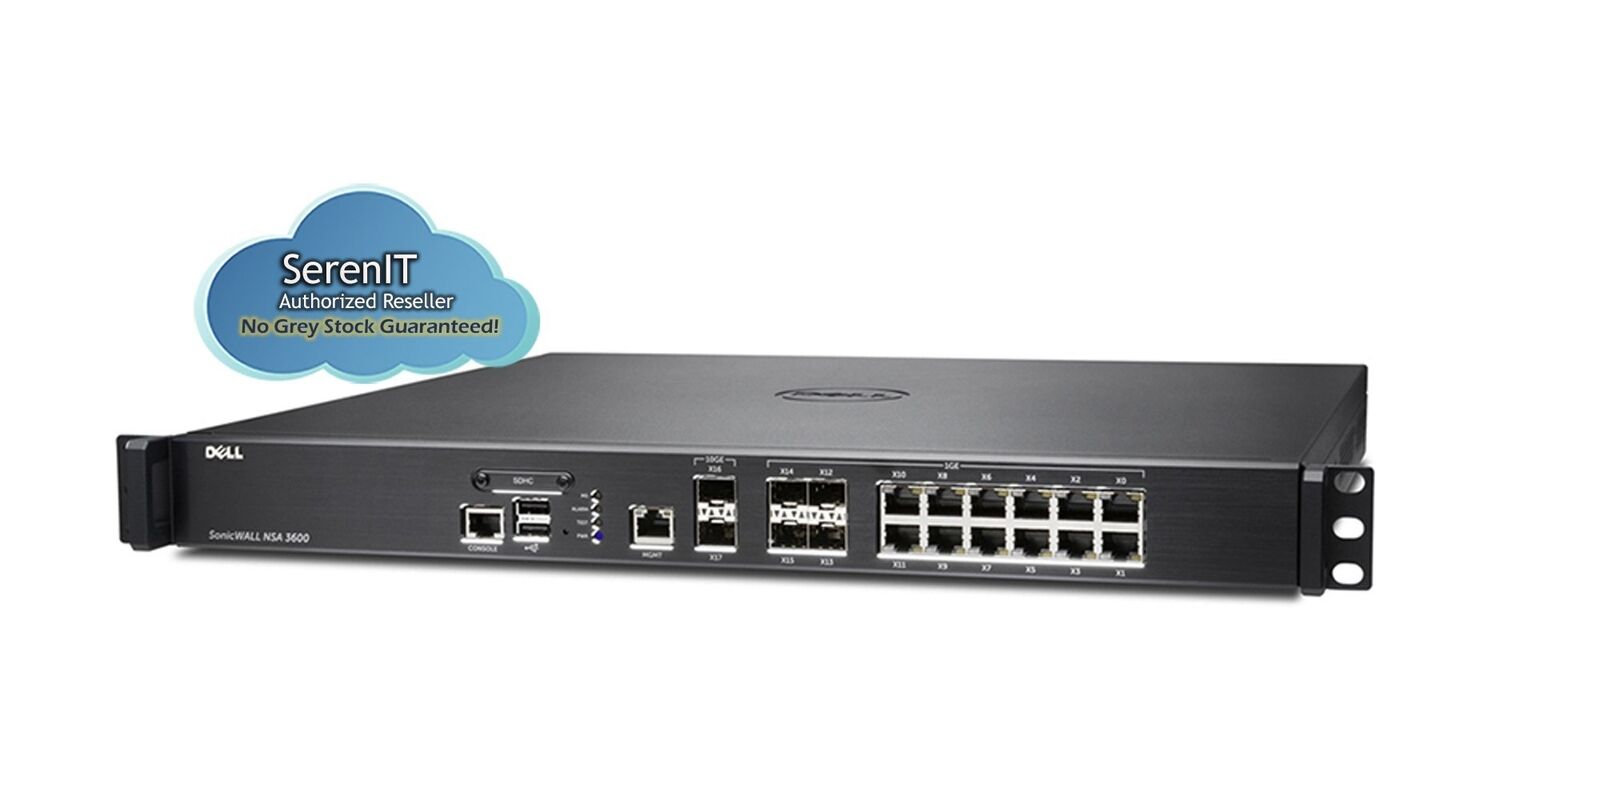 SONICWALL 01-SSC-3851 / SonicWALL NSA 3600 Network Security Appliance / 12 Port